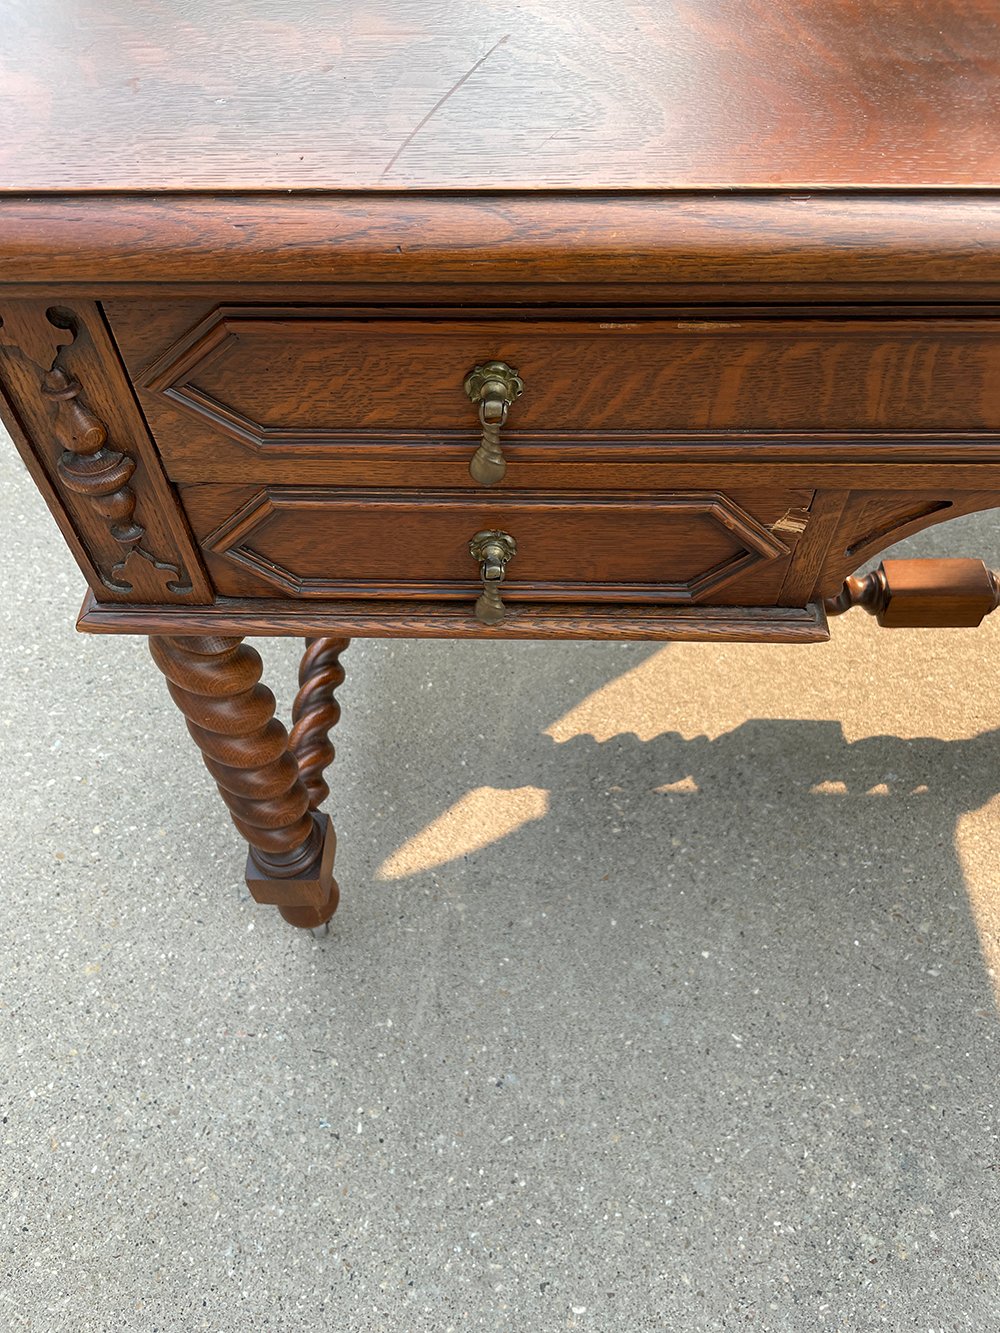 An Antique Addition for My Home Office - roomfortuesday.com